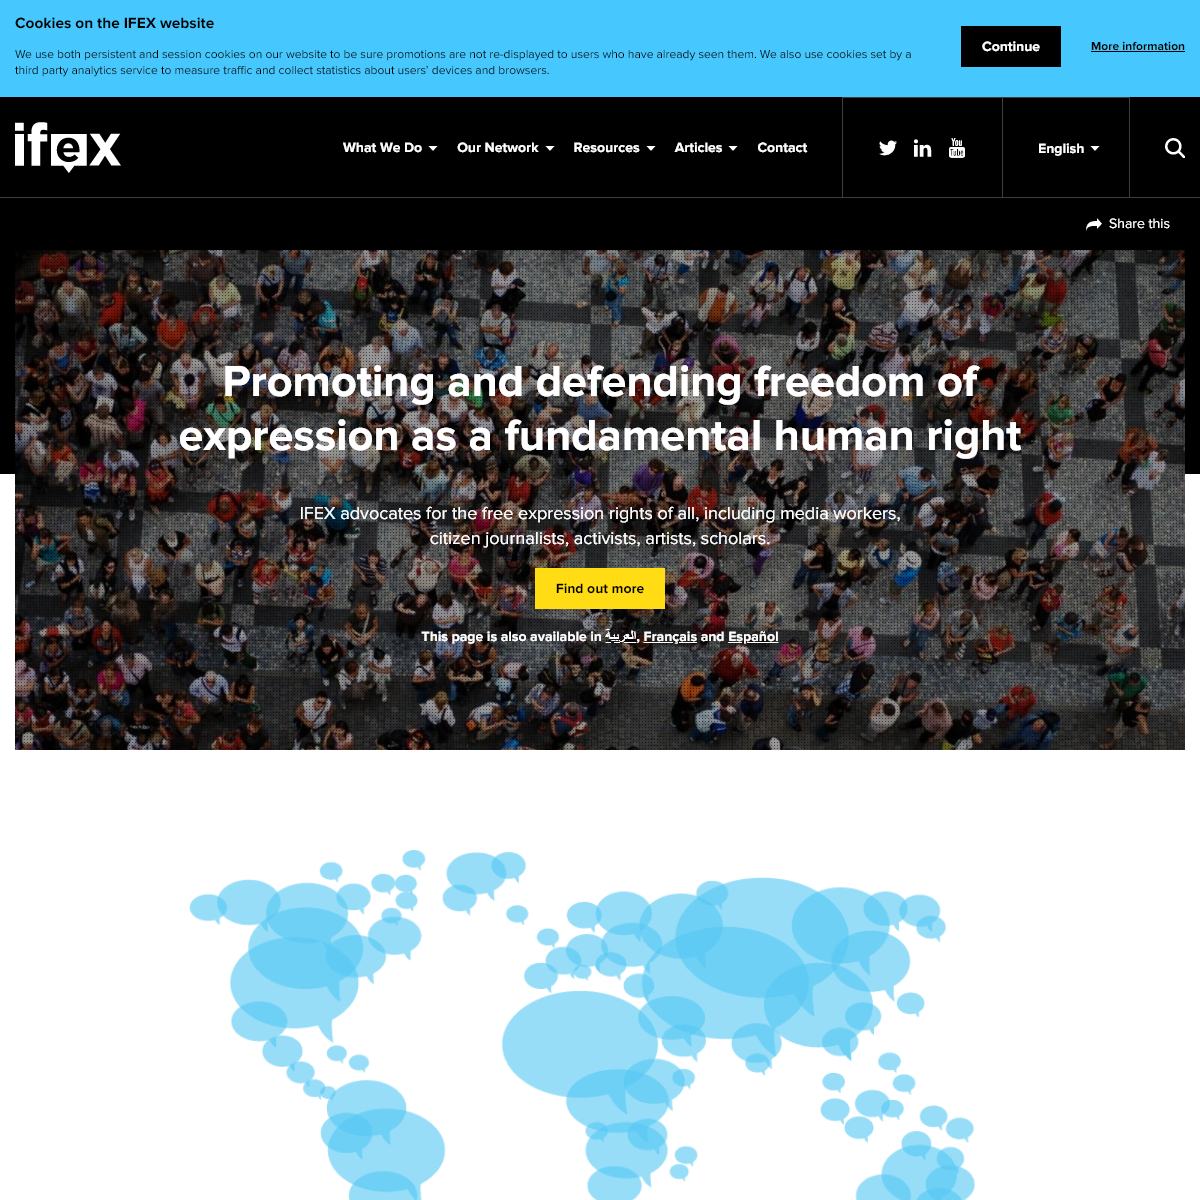 A complete backup of ifex.org